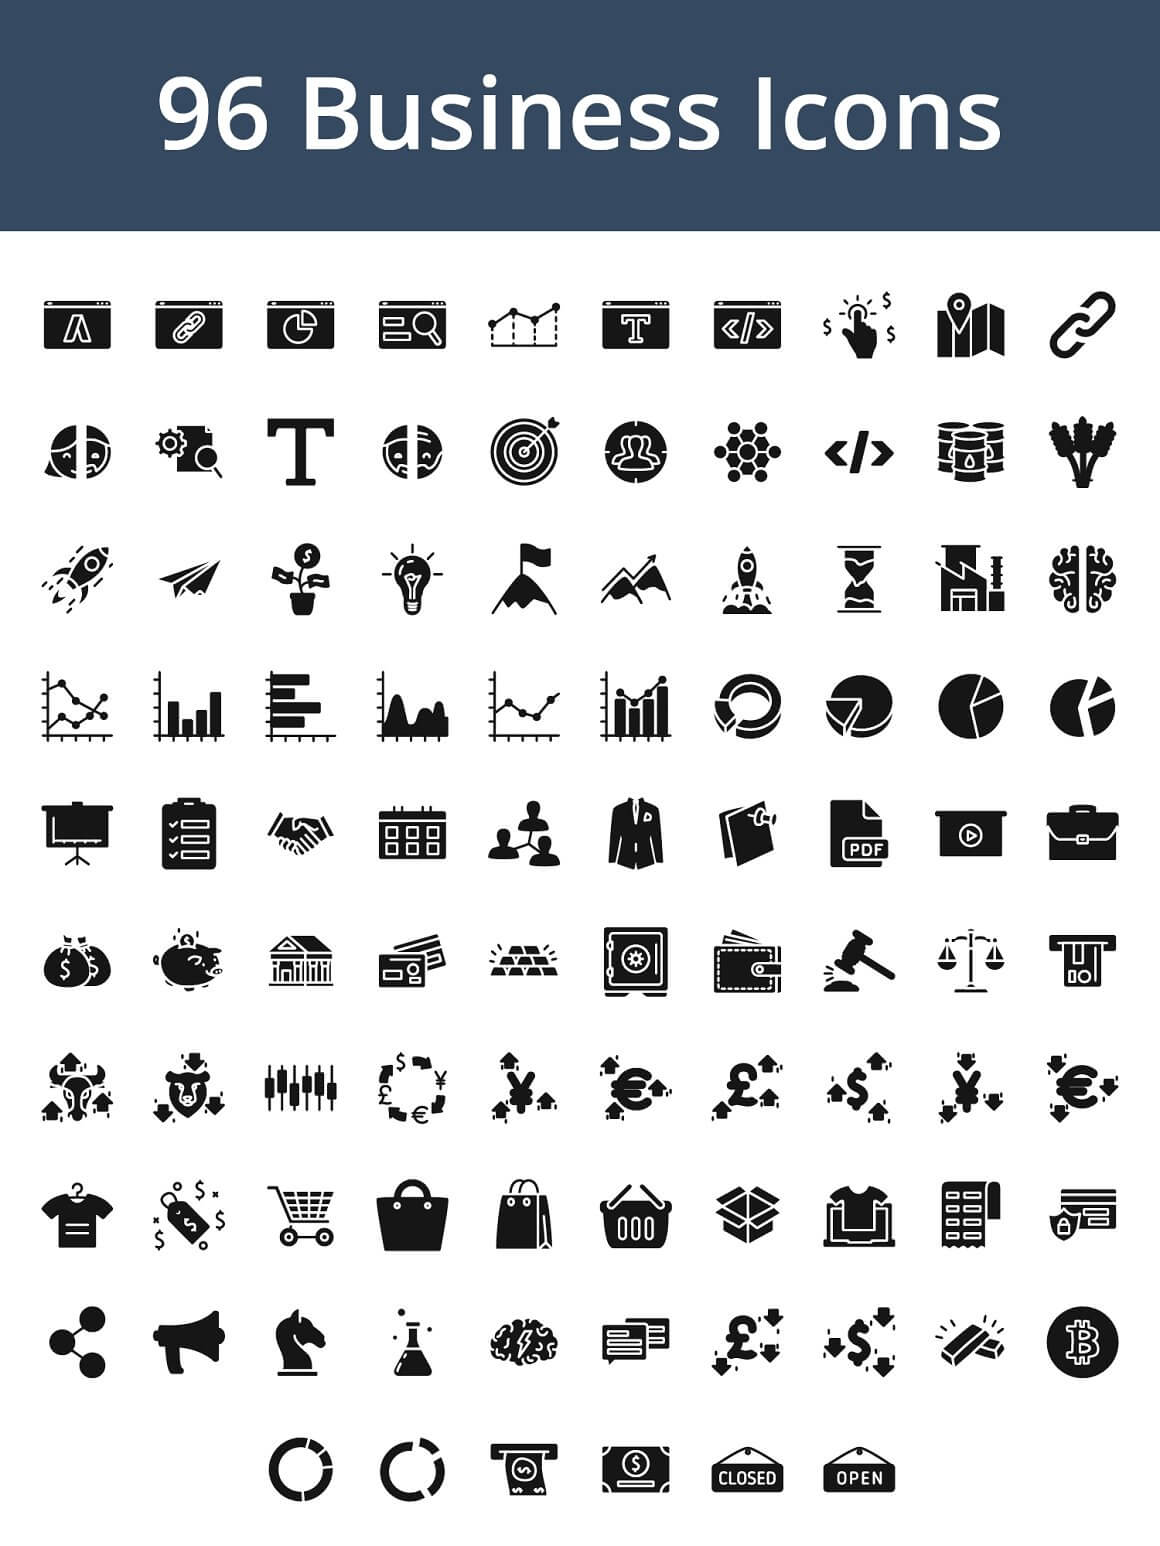 96 Business Icons.